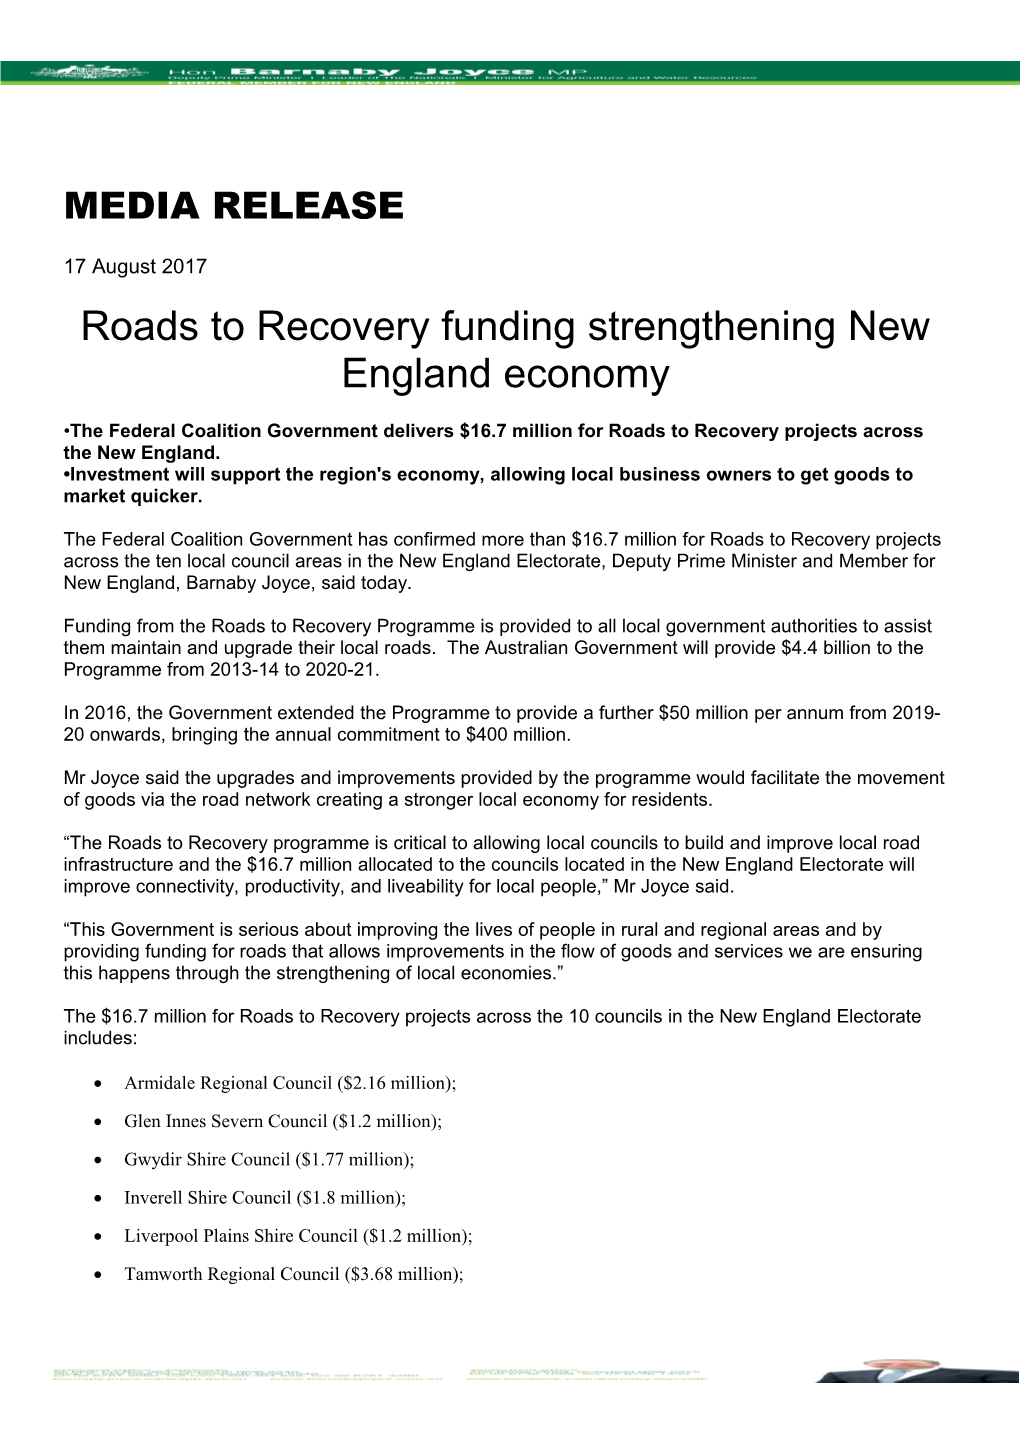 Roads to Recovery Funding Strengthening New England Economy